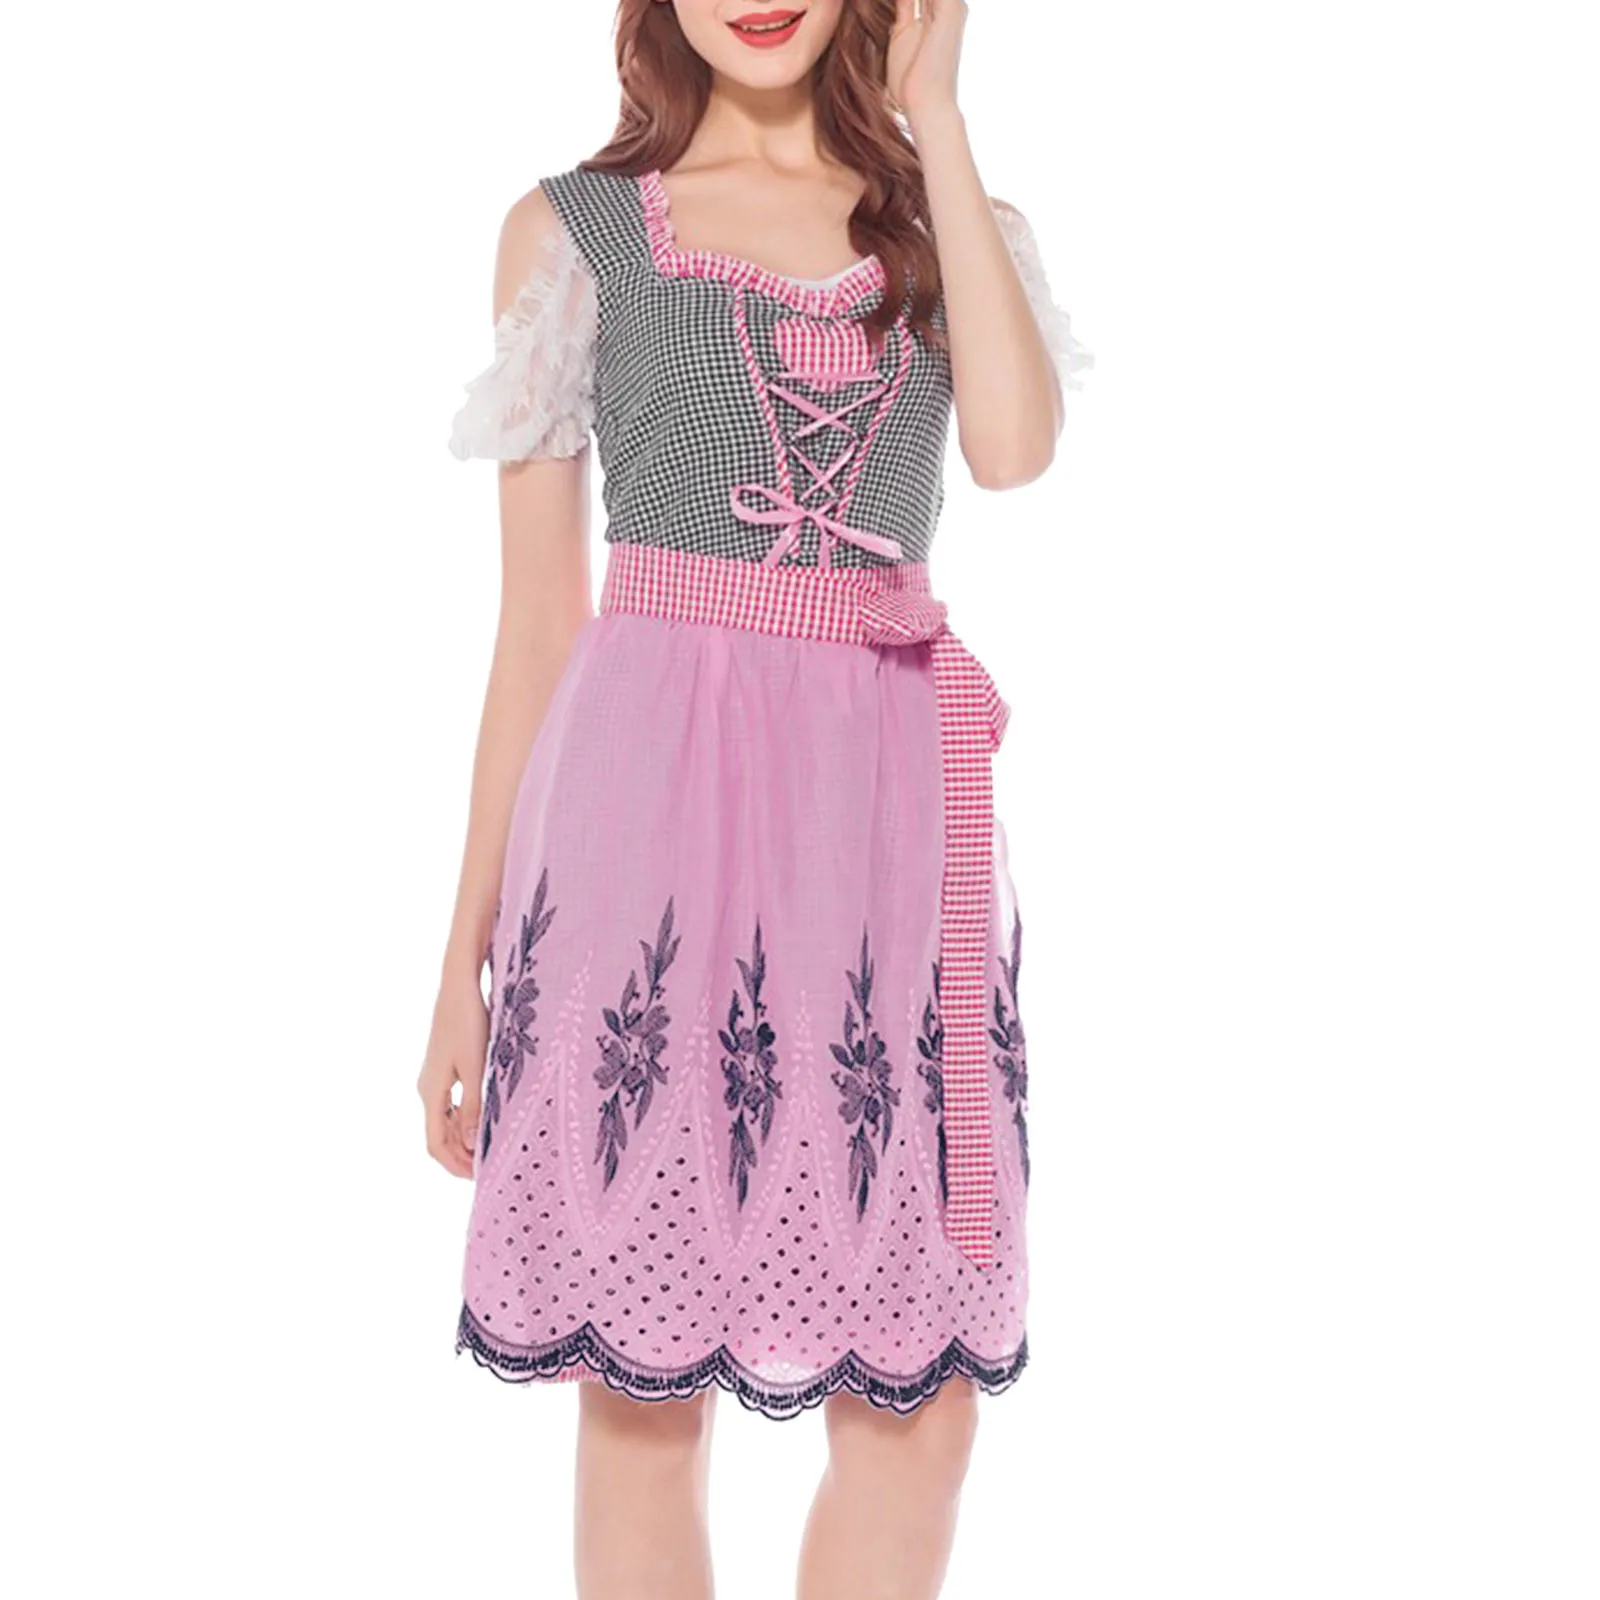 

Women Casual Retro Cute Oktoberfest Fun Stage Costumes Strappy Bowknot Dress Dresses for Summer Casual Womens Swing Dress